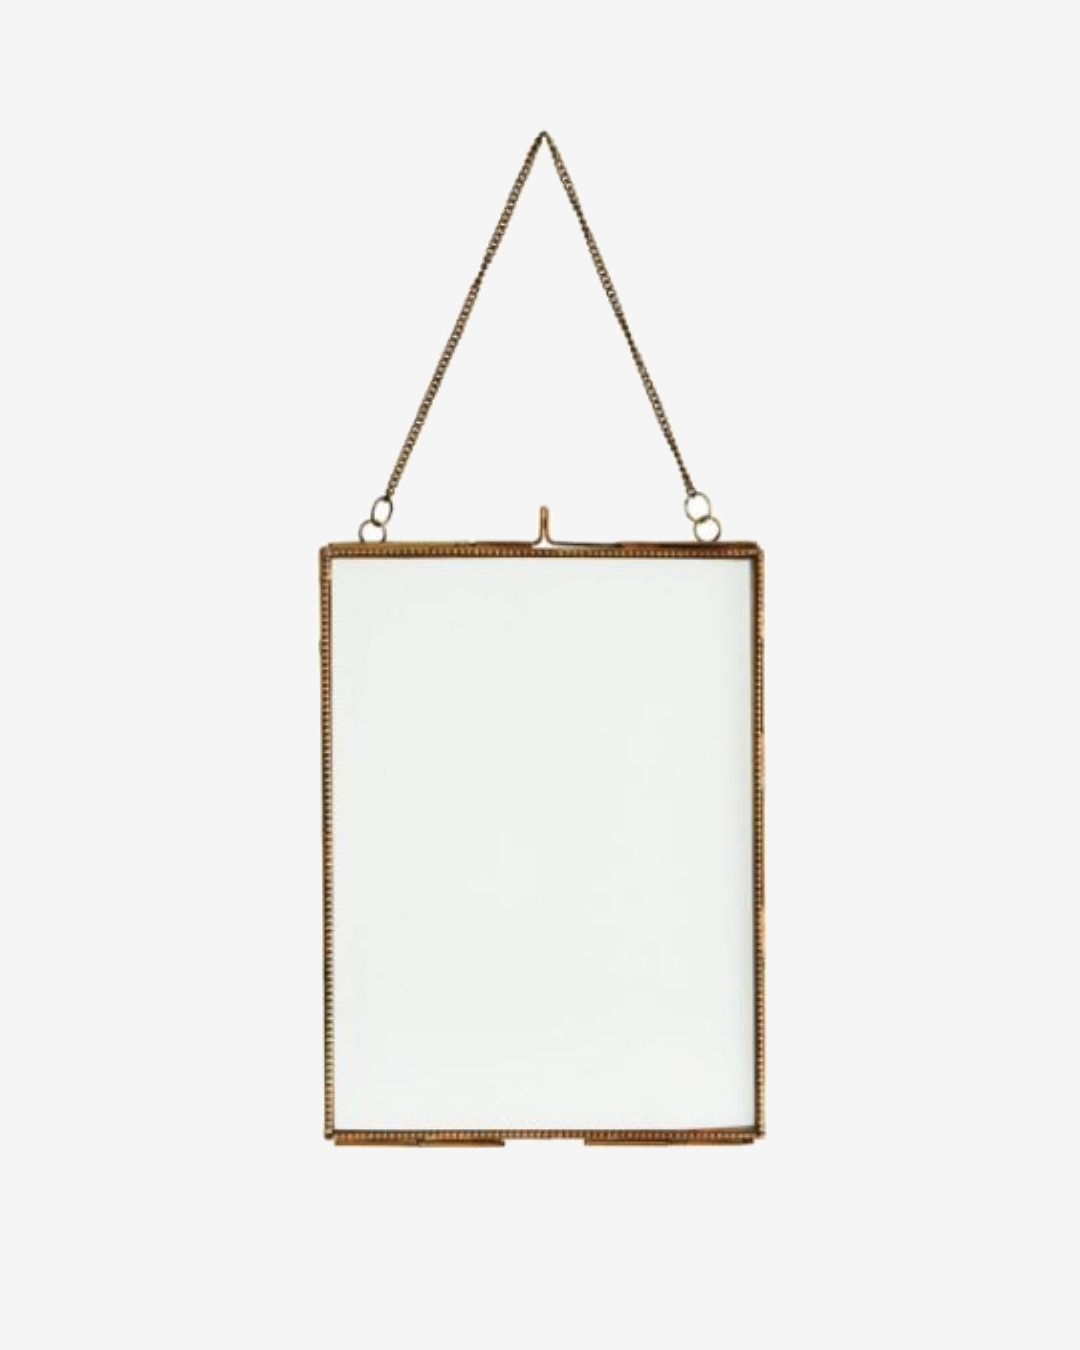 Hanging brass and gold photo frame